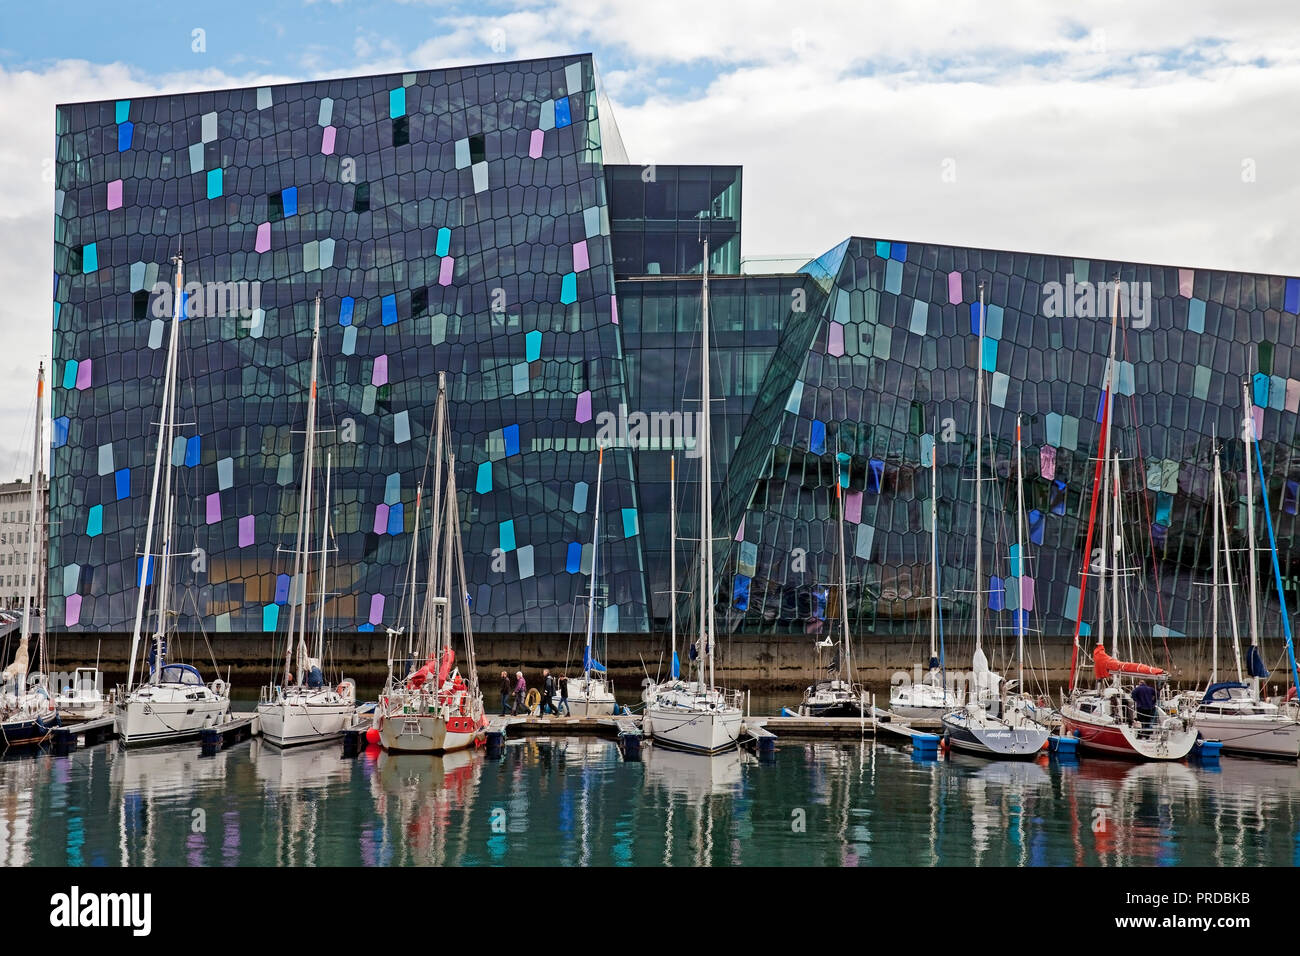 Harpa Concert Hall with marina, dichromatic glass facade with colour effects by Olafur Eliasson, Reykjavik, Iceland Stock Photo